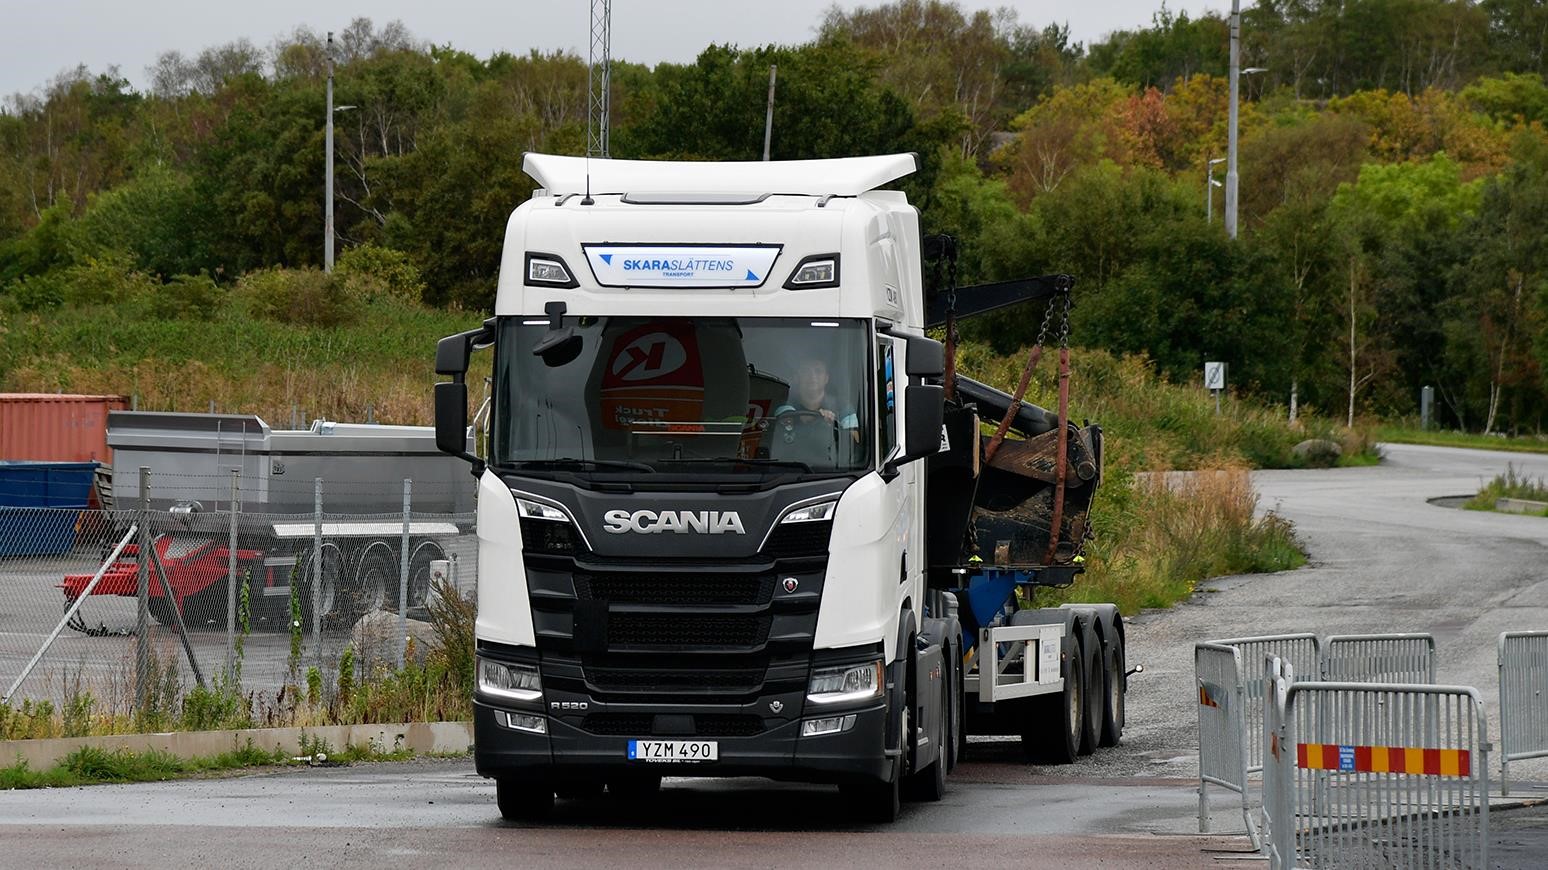 New Scania R 520 Trucks Help Swedish Haulier Significantly Cut Down On Fuel Costs